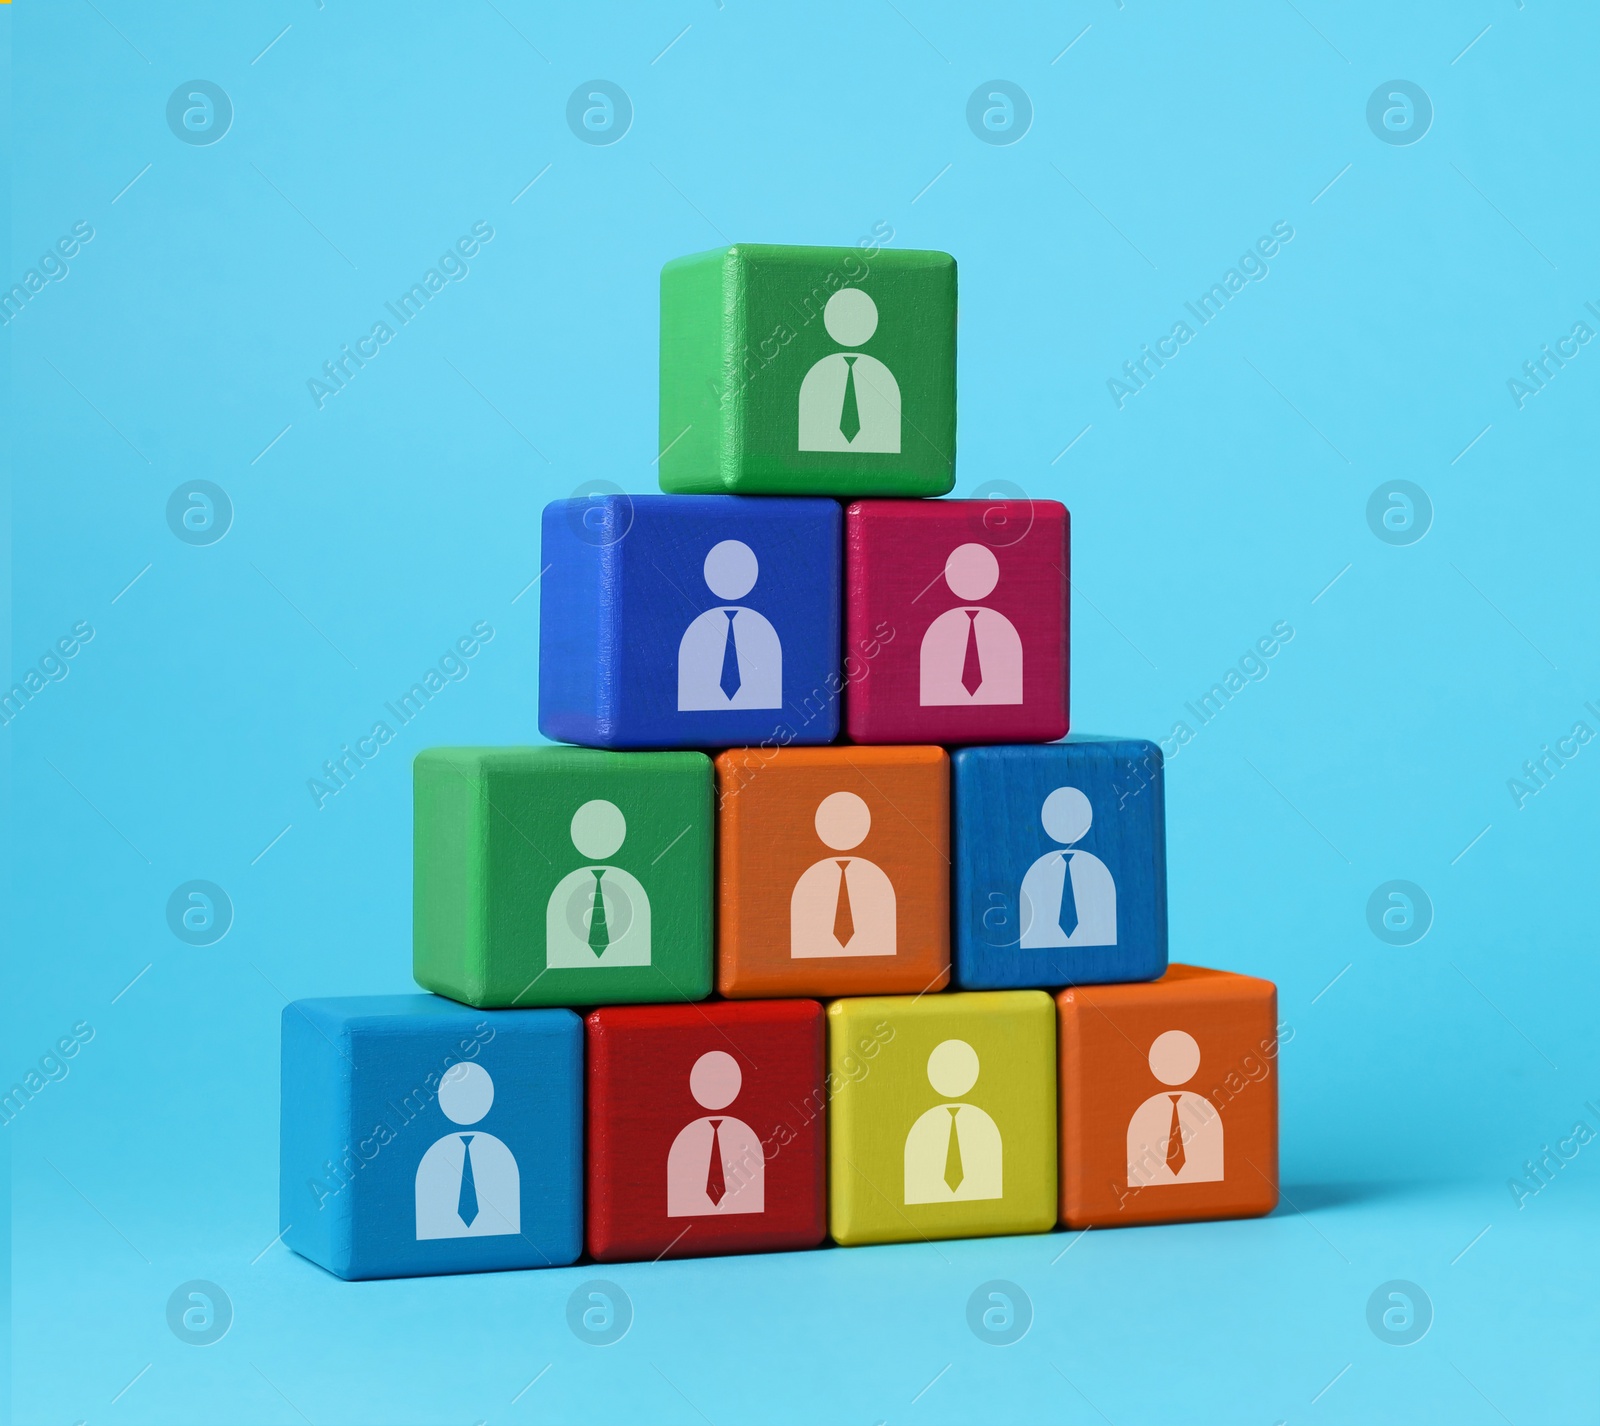 Image of Team and management concept. Pyramid of colorful cubes with human icons on light blue background